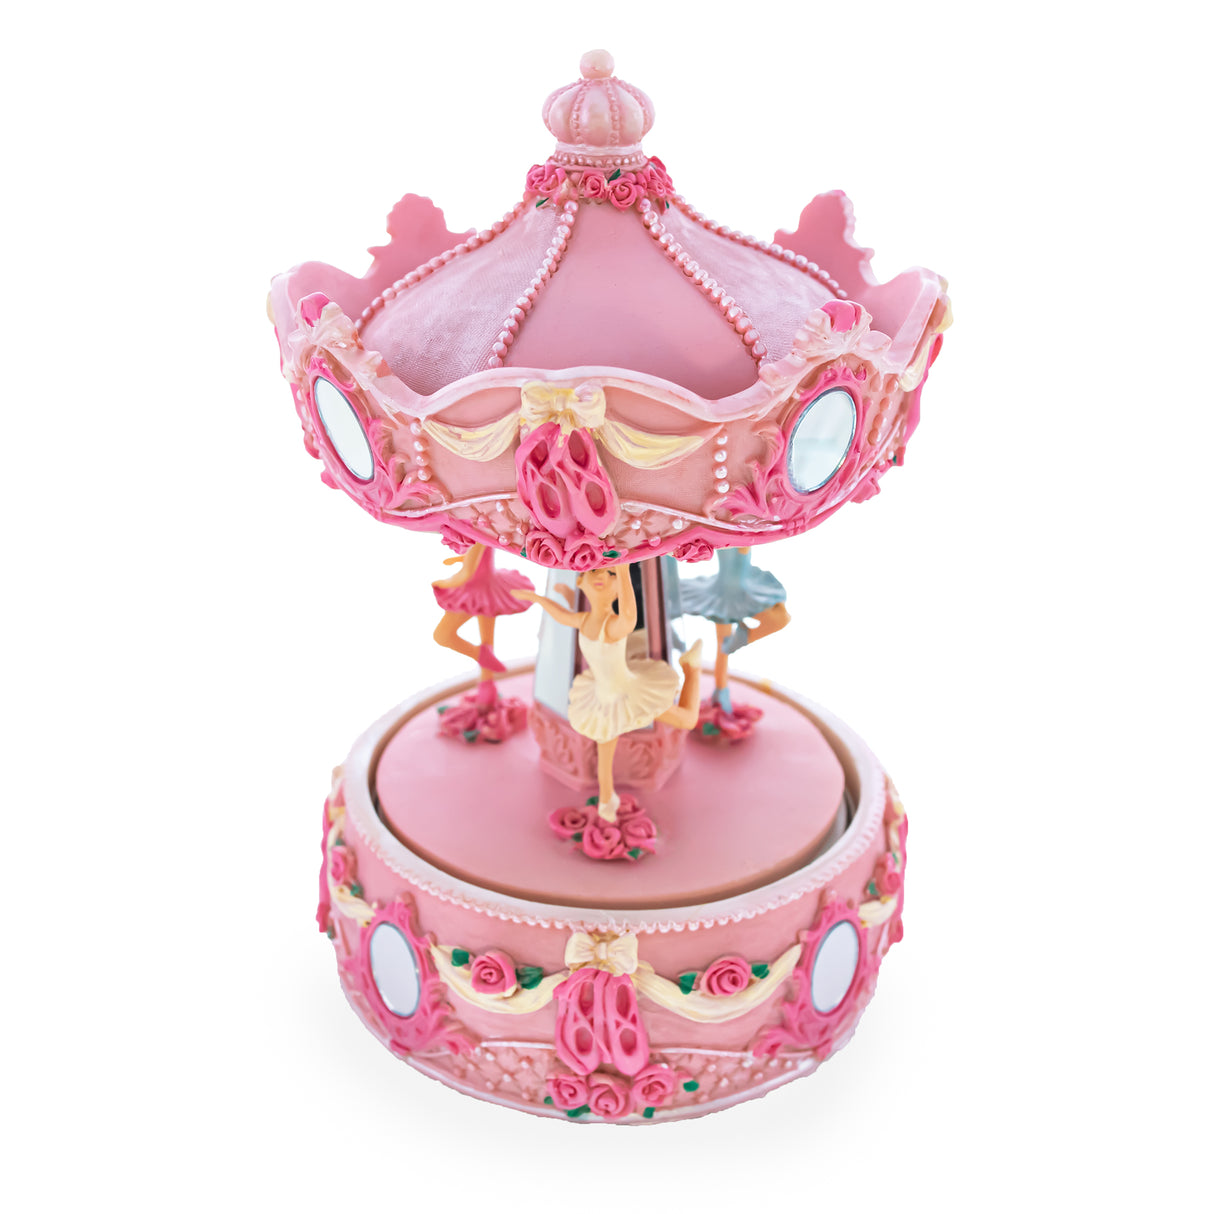 Dance of the Ballerinas: Three-Tier Ballet Carousel - Rotating Musical Figurine with Graceful Dancers ,dimensions in inches: 6.5 x 4.25 x 4.25